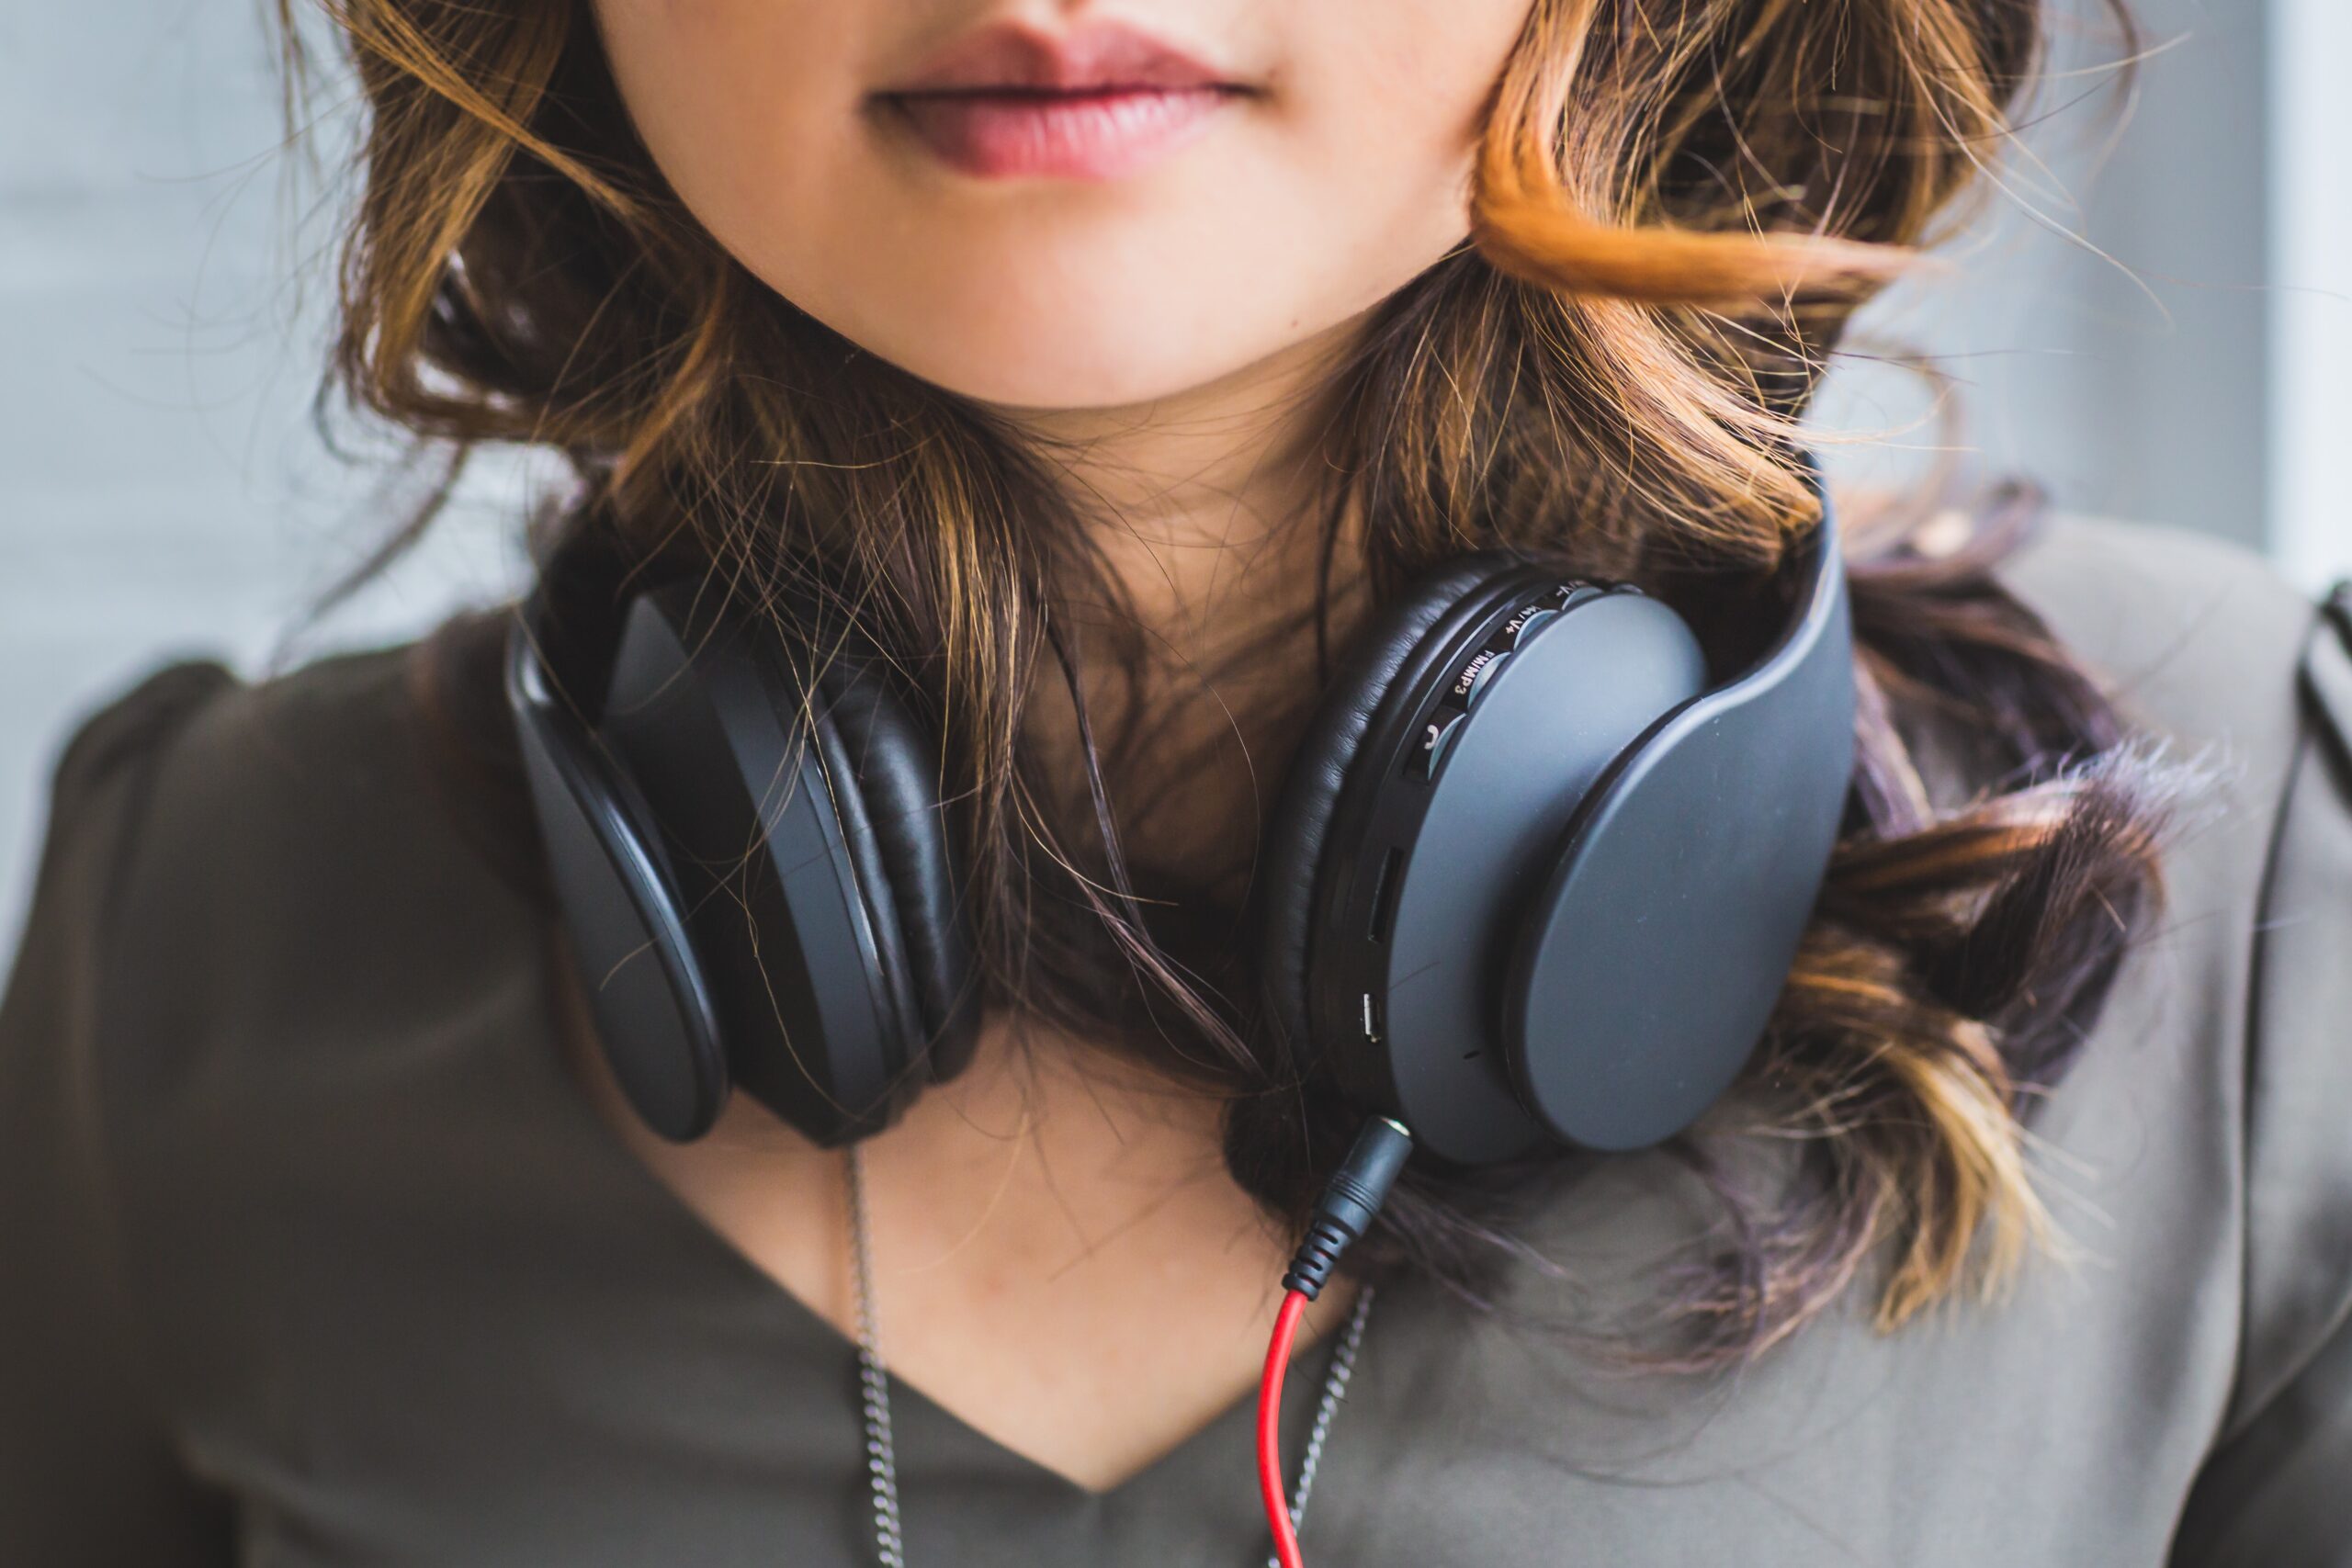 Sound quality and podcasts. Girl with headphones around neck.